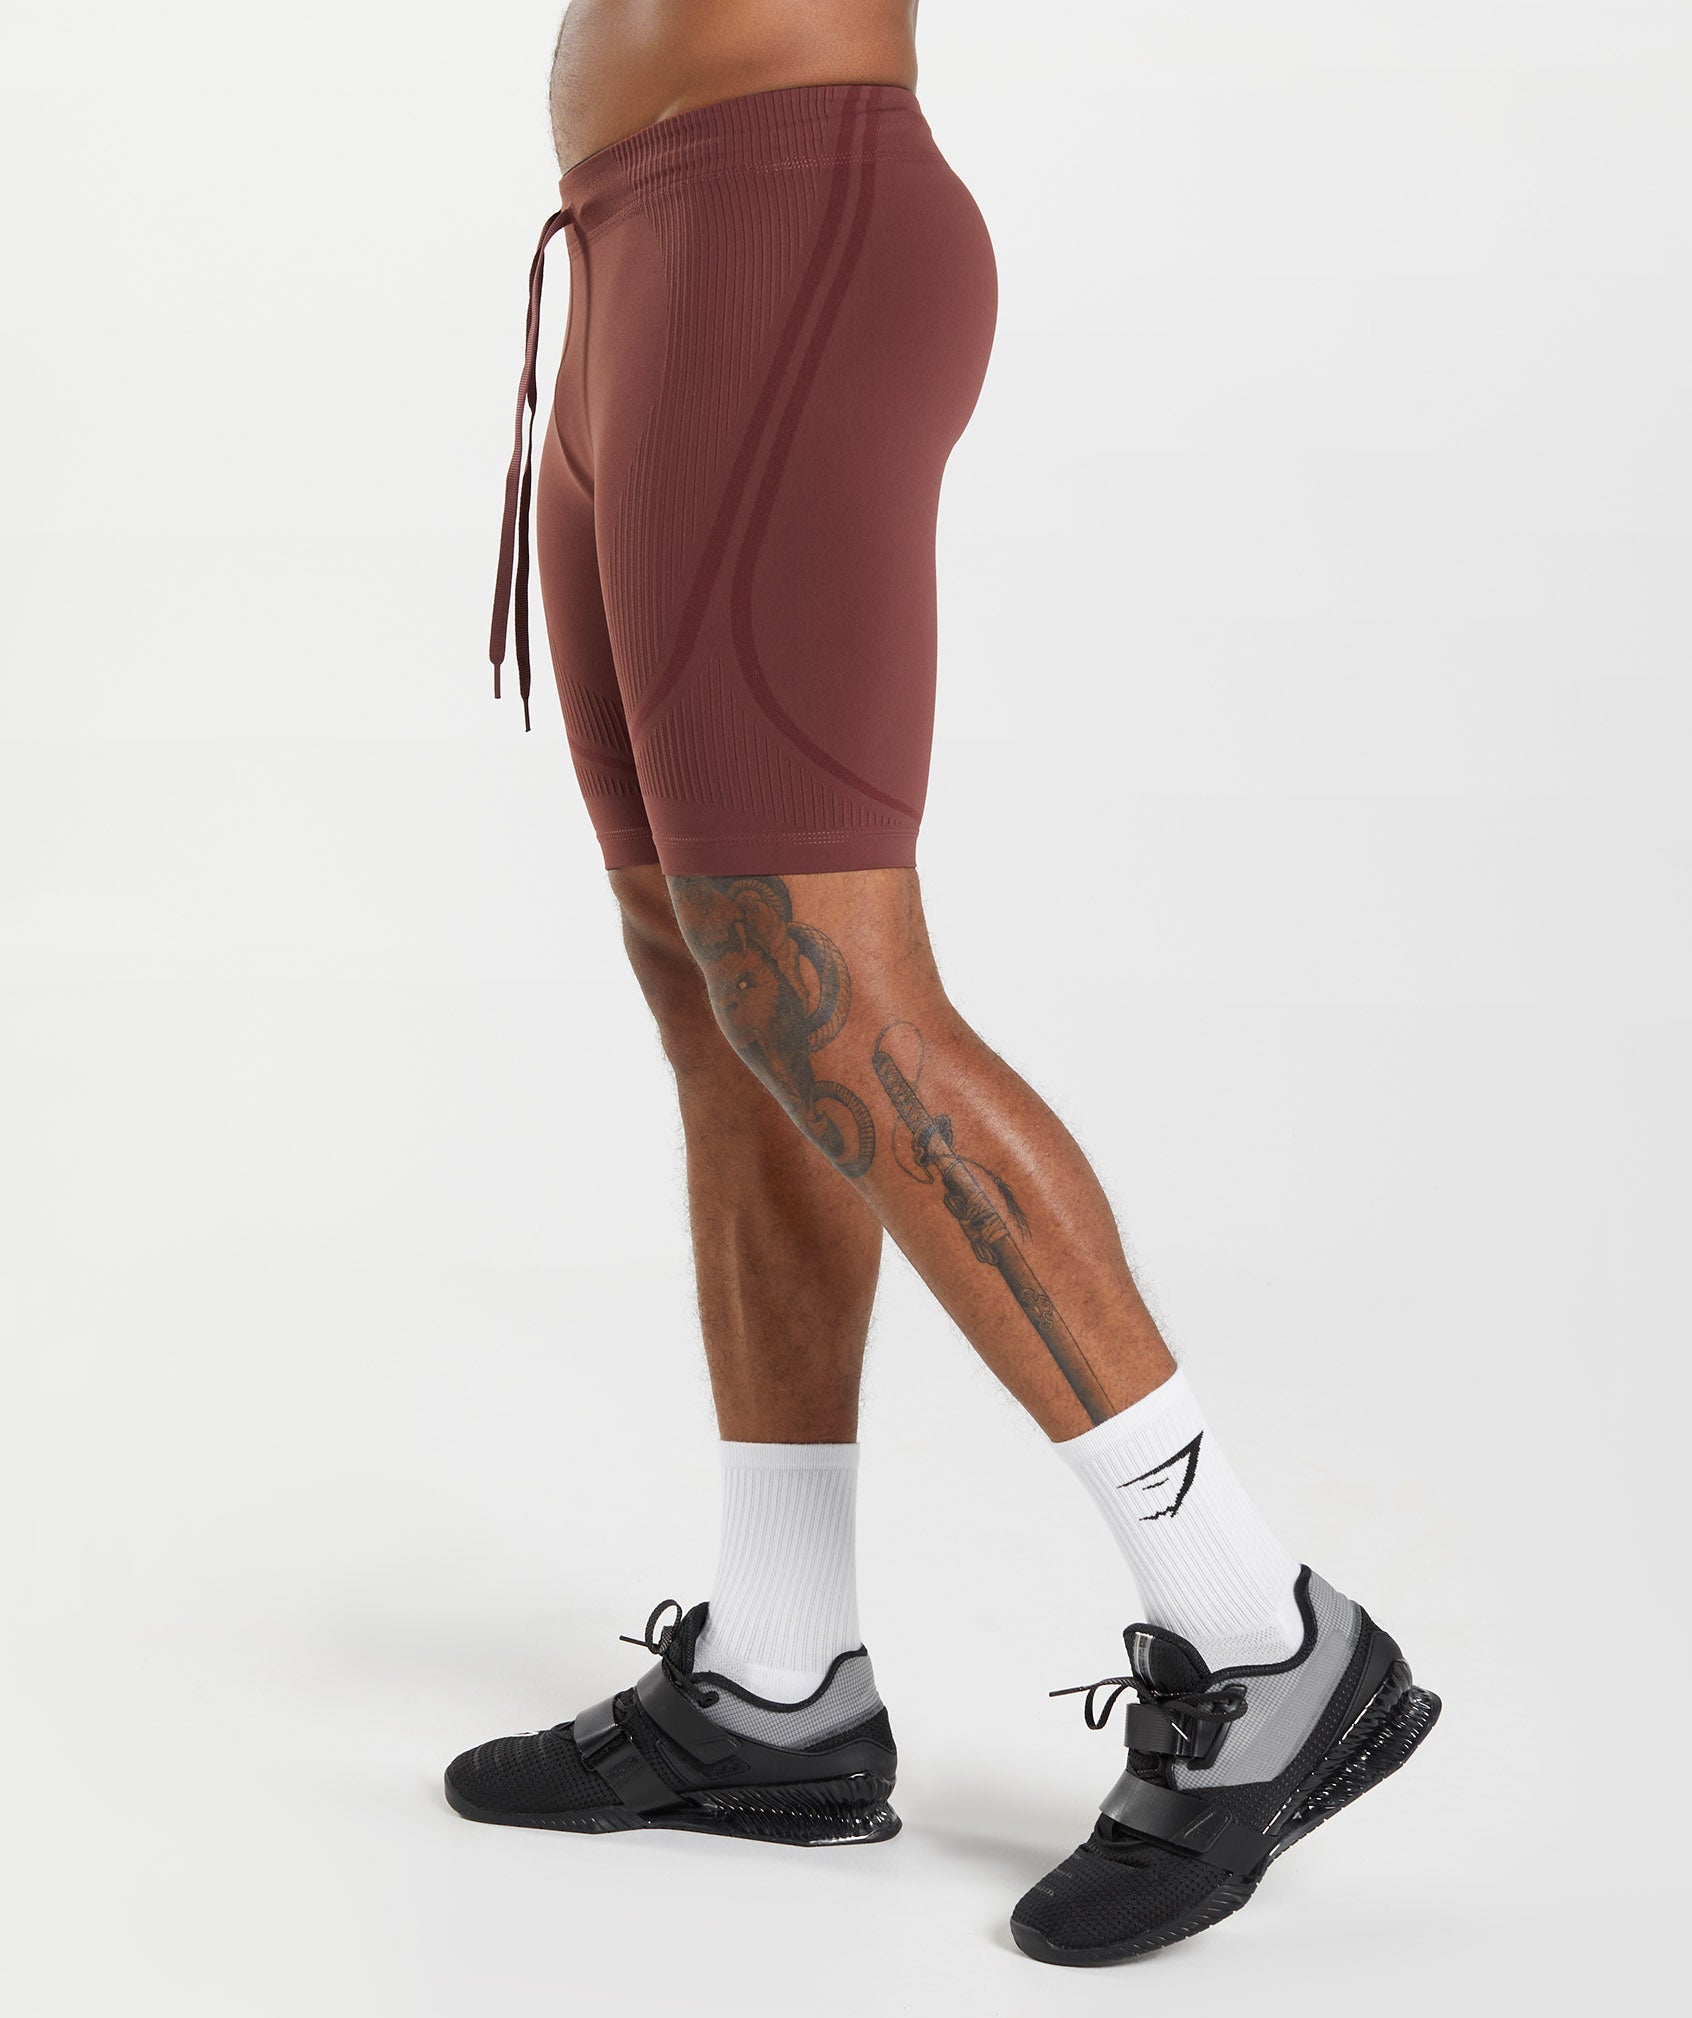 315 Seamless 1/2 Shorts in Cherry Brown/Athletic Maroon - view 3